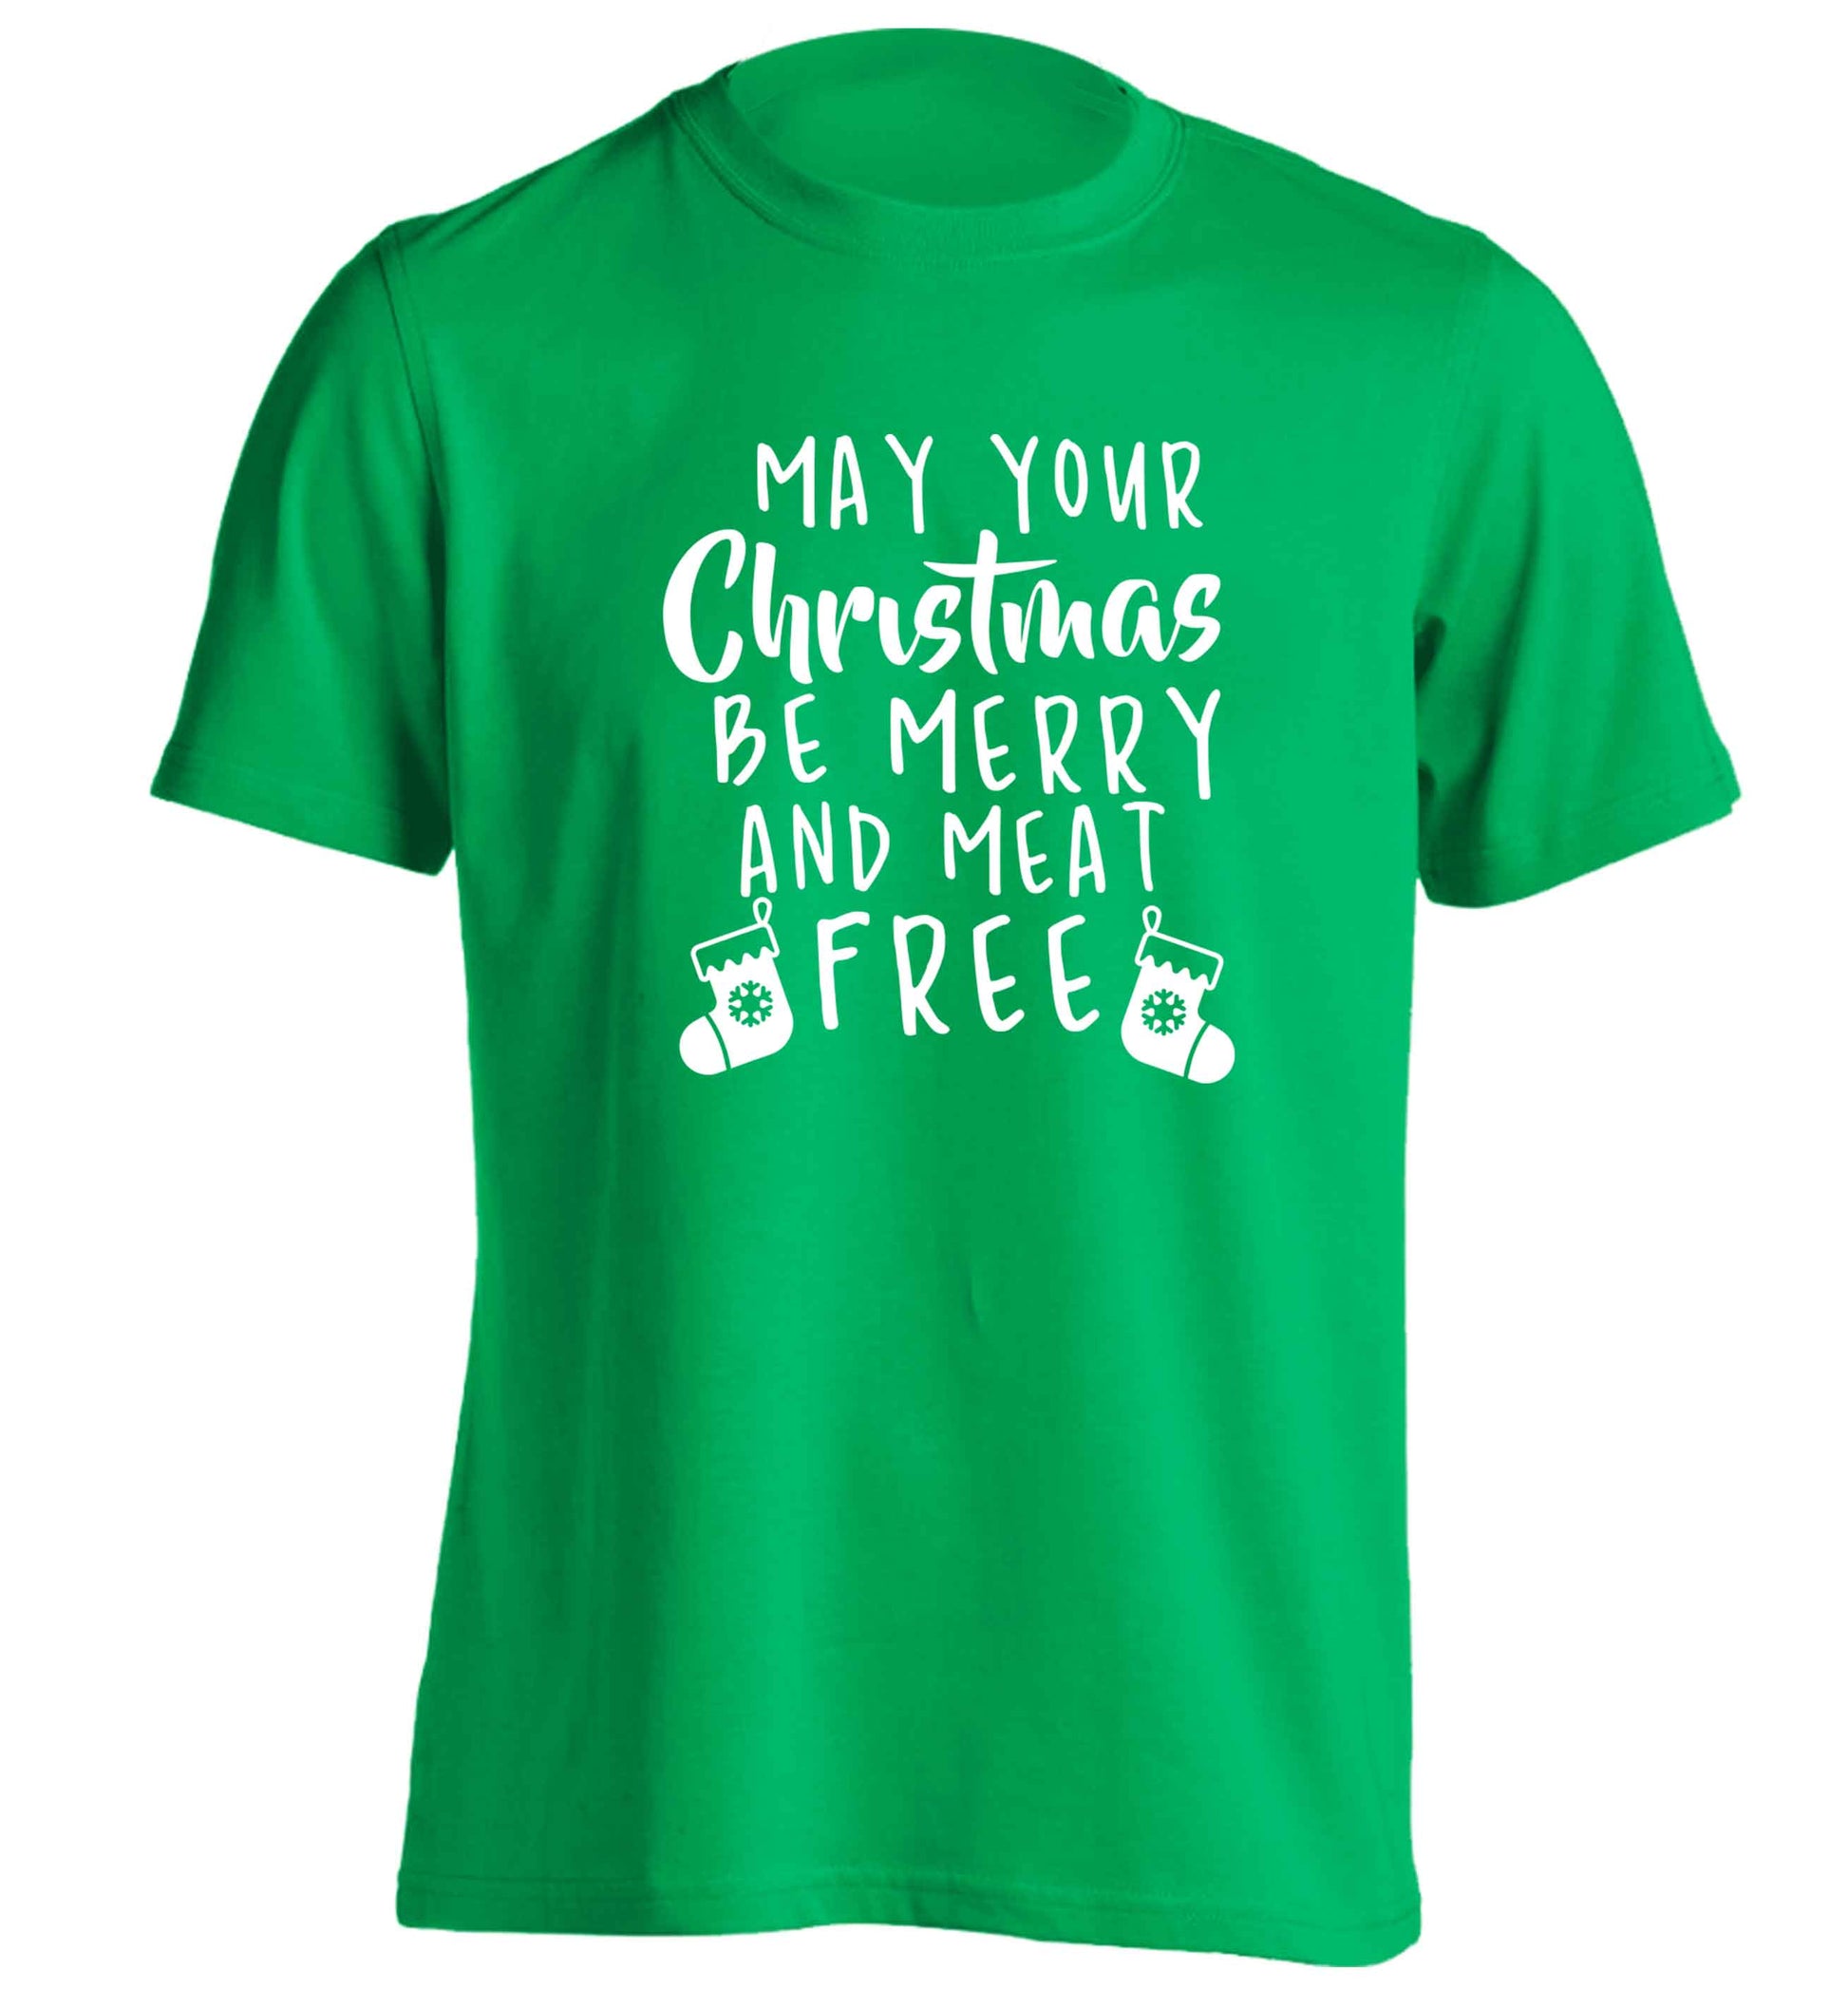 May your Christmas be merry and meat free adults unisex green Tshirt 2XL